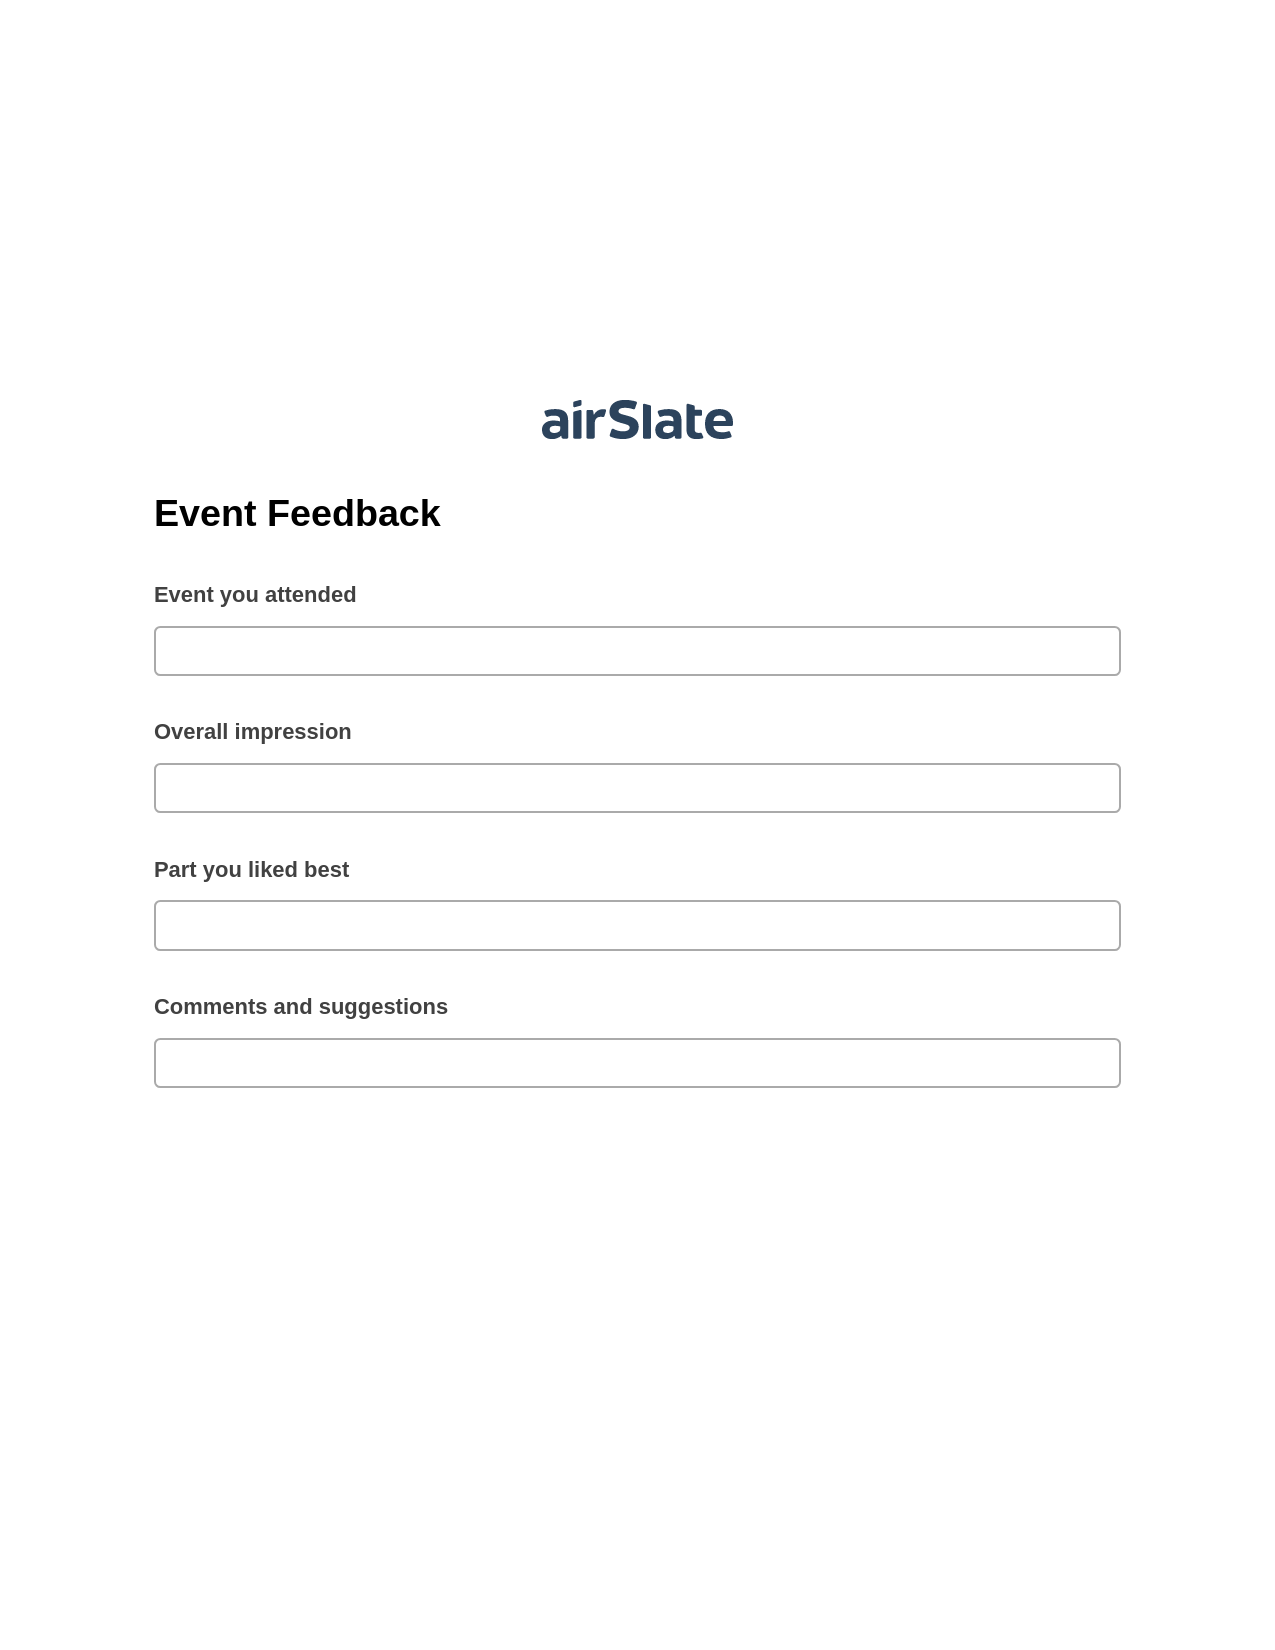 Event Feedback Pre-fill from CSV File Bot, Create Salesforce Record Bot, Export to NetSuite Record Bot